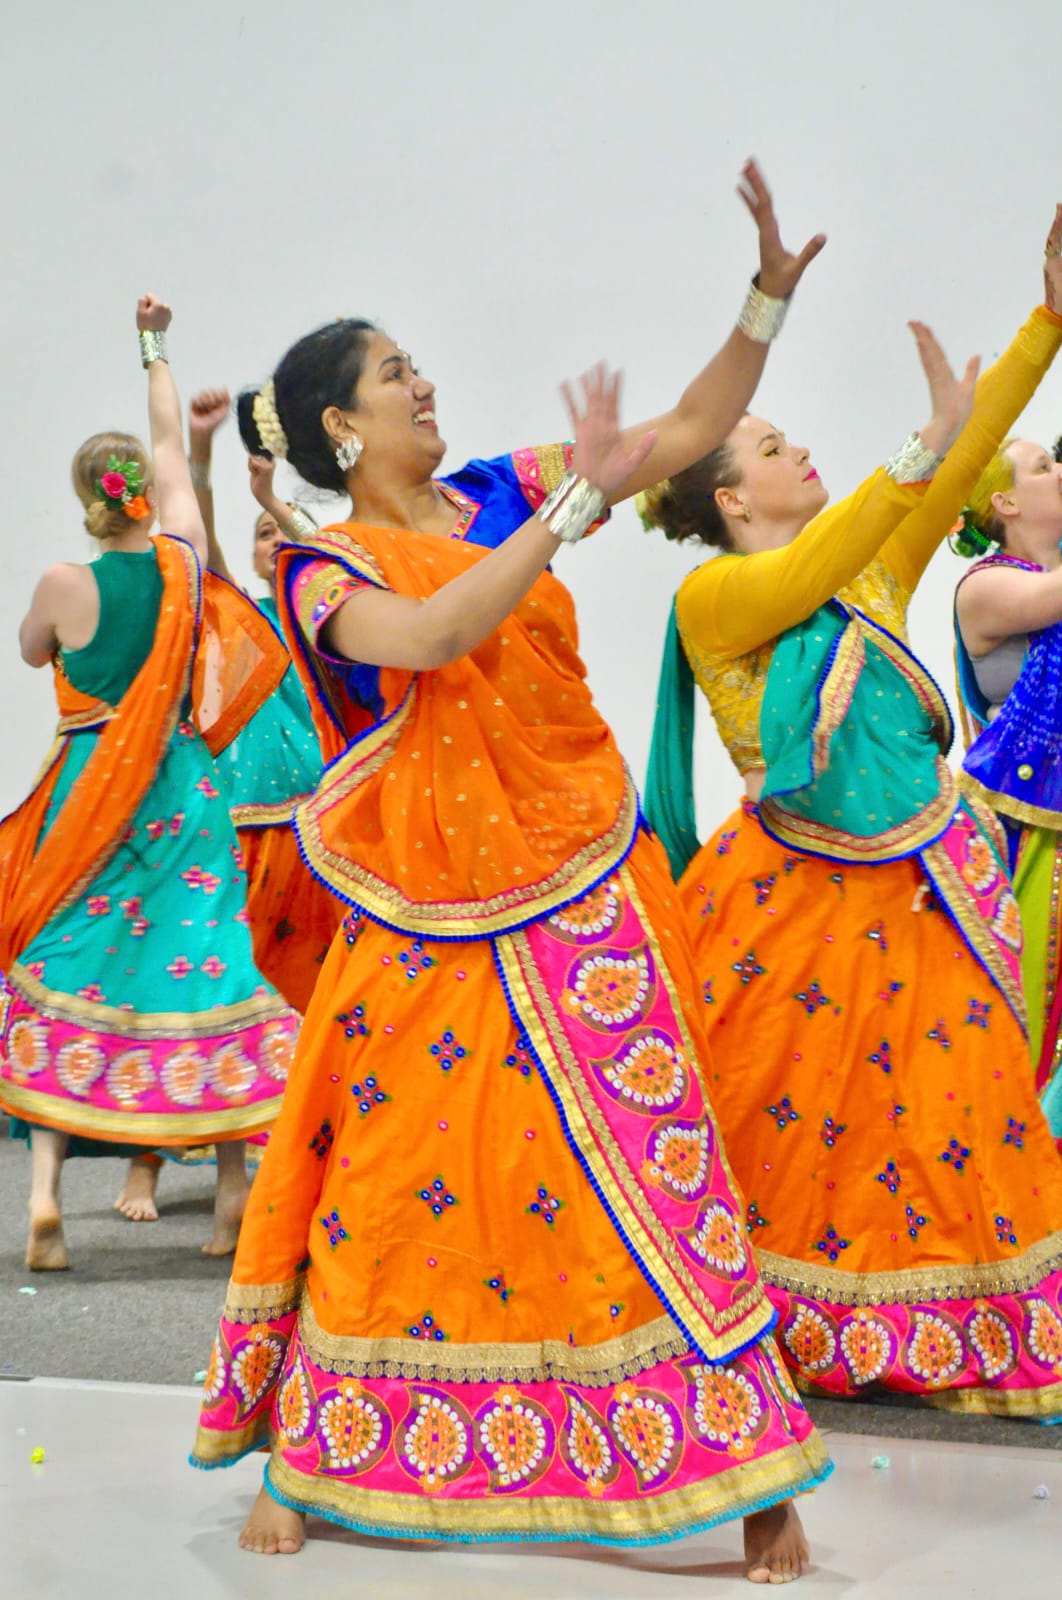 A group of adult dancers in bright coloured Indian skirts and tops lift their arms to the side in unison